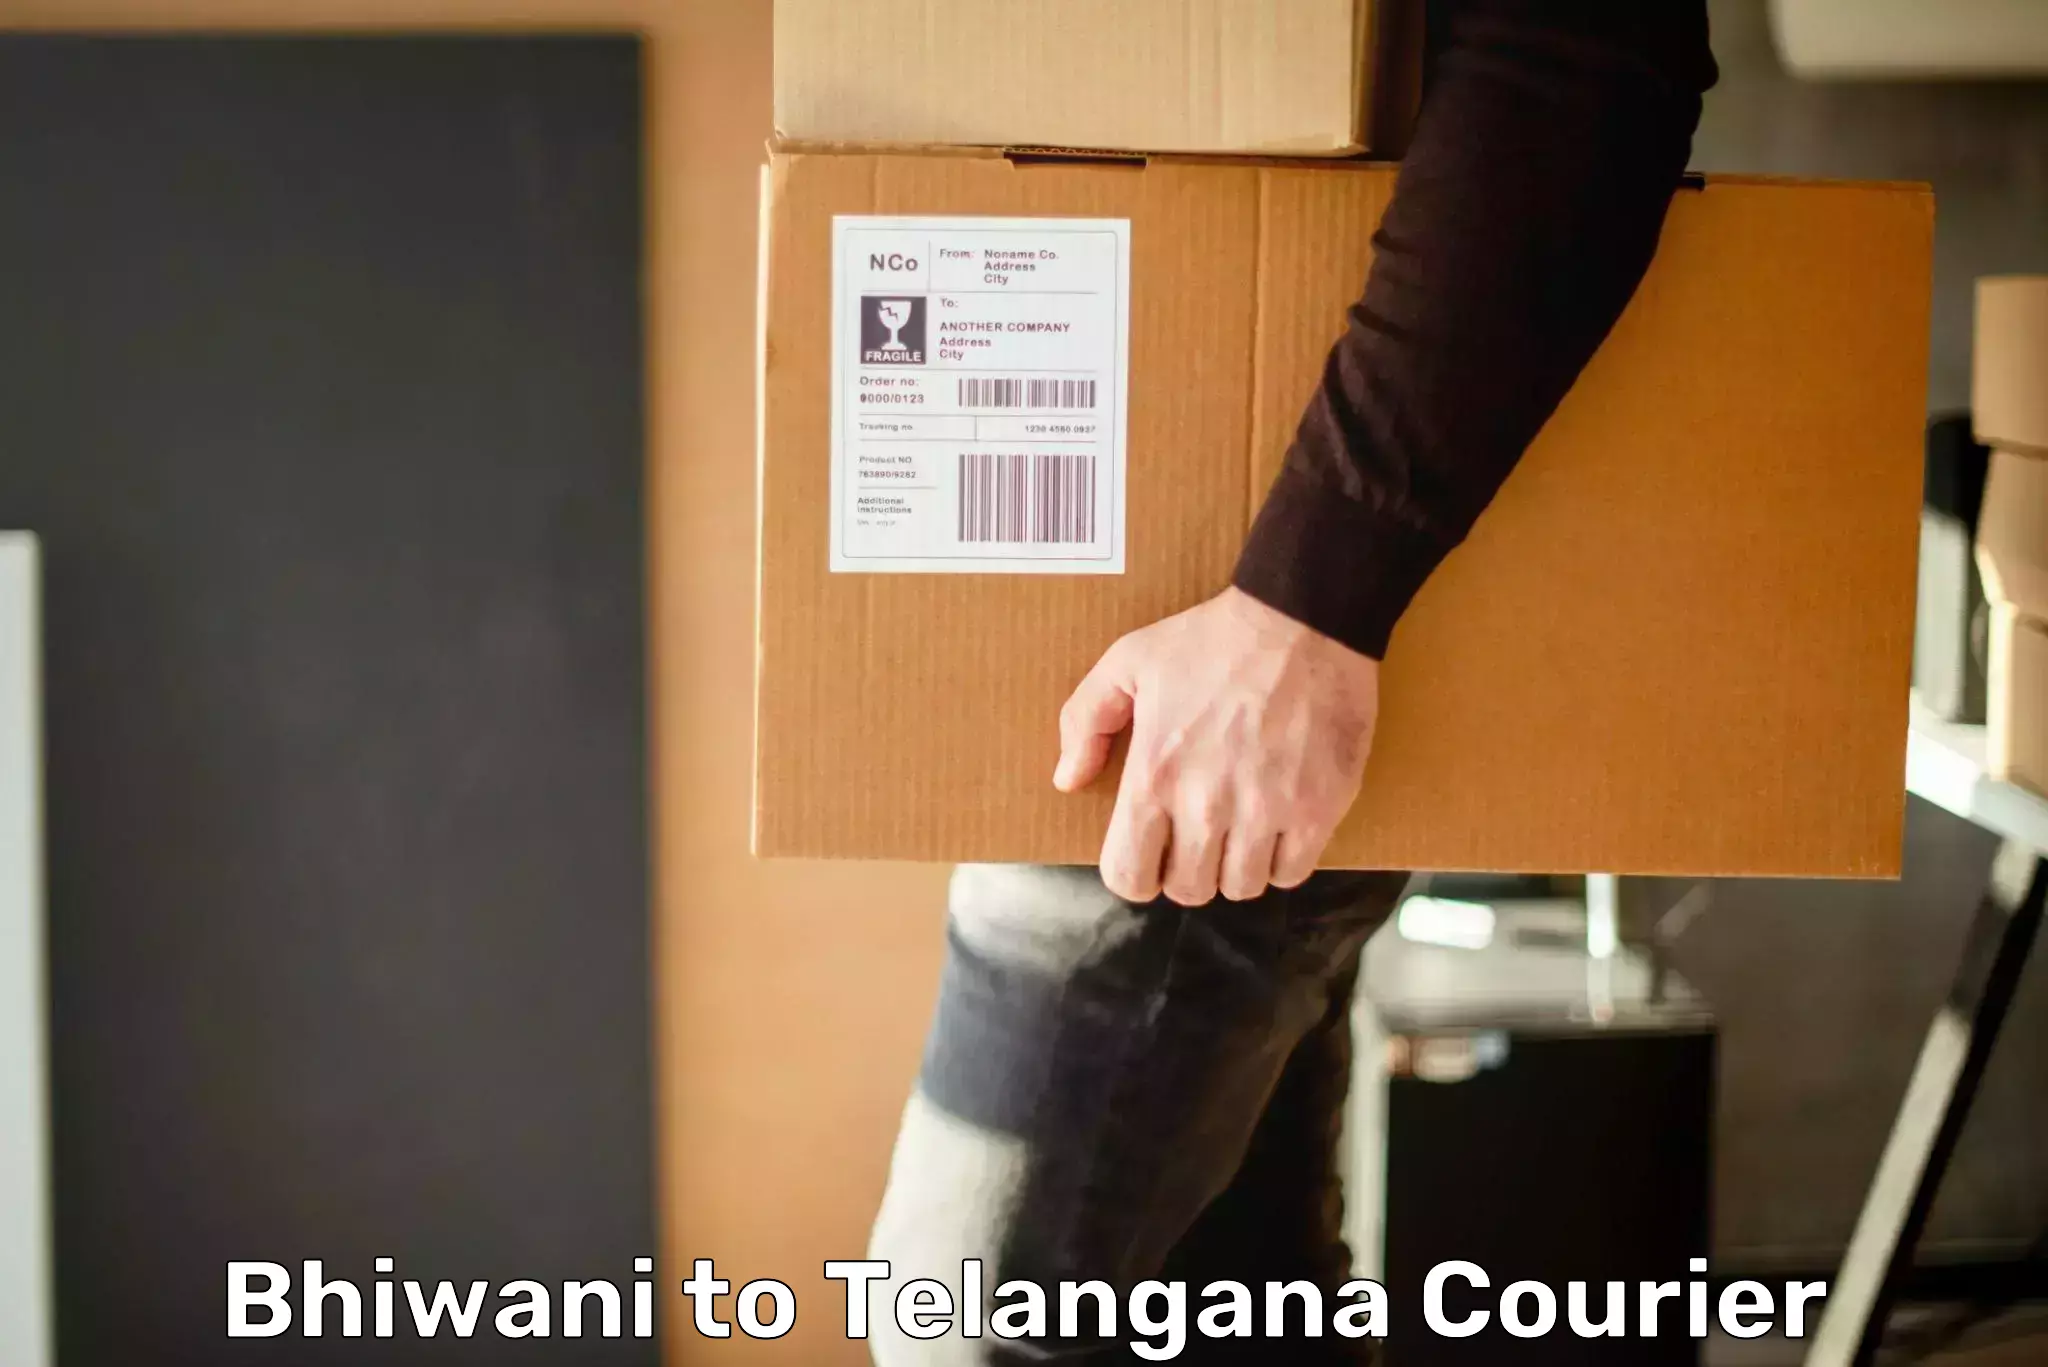 Parcel delivery automation Bhiwani to Secunderabad